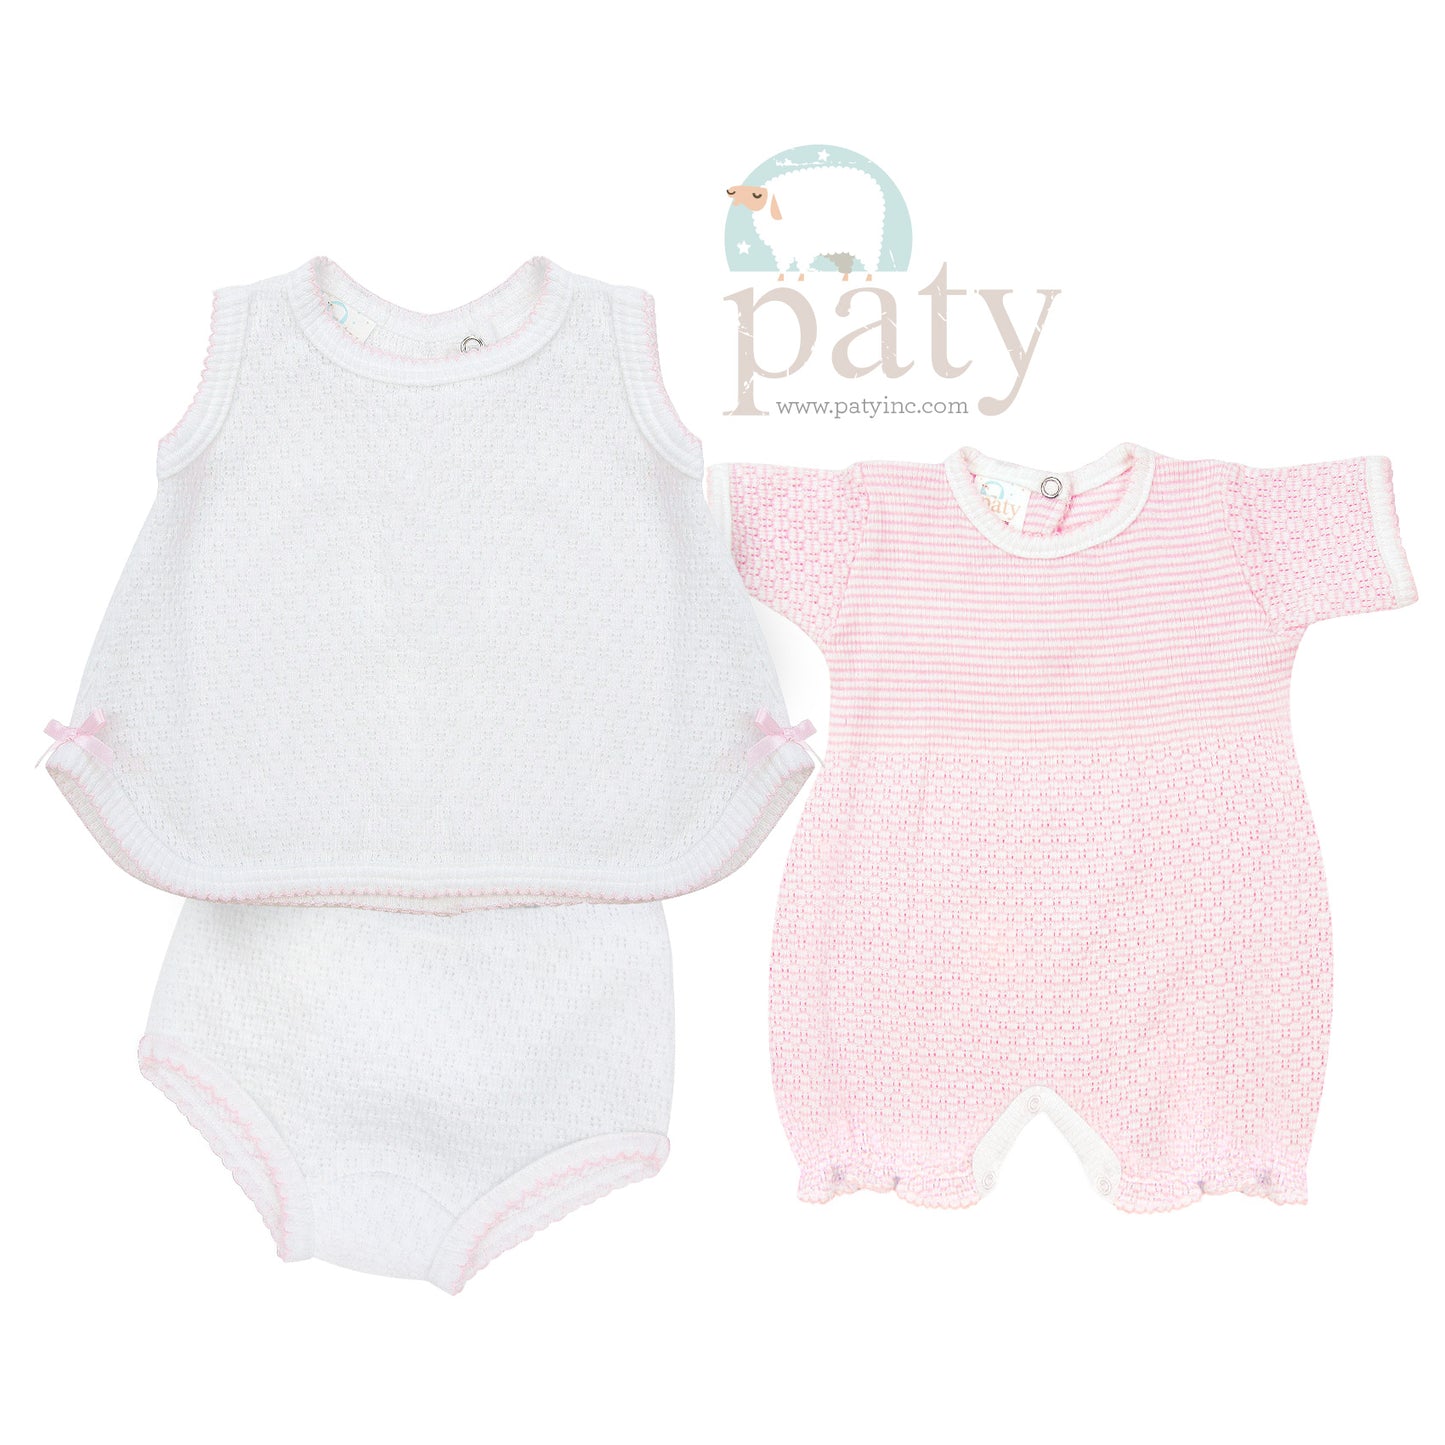 Bubble and 2 PC Sleeveless Top with Diaper Covers